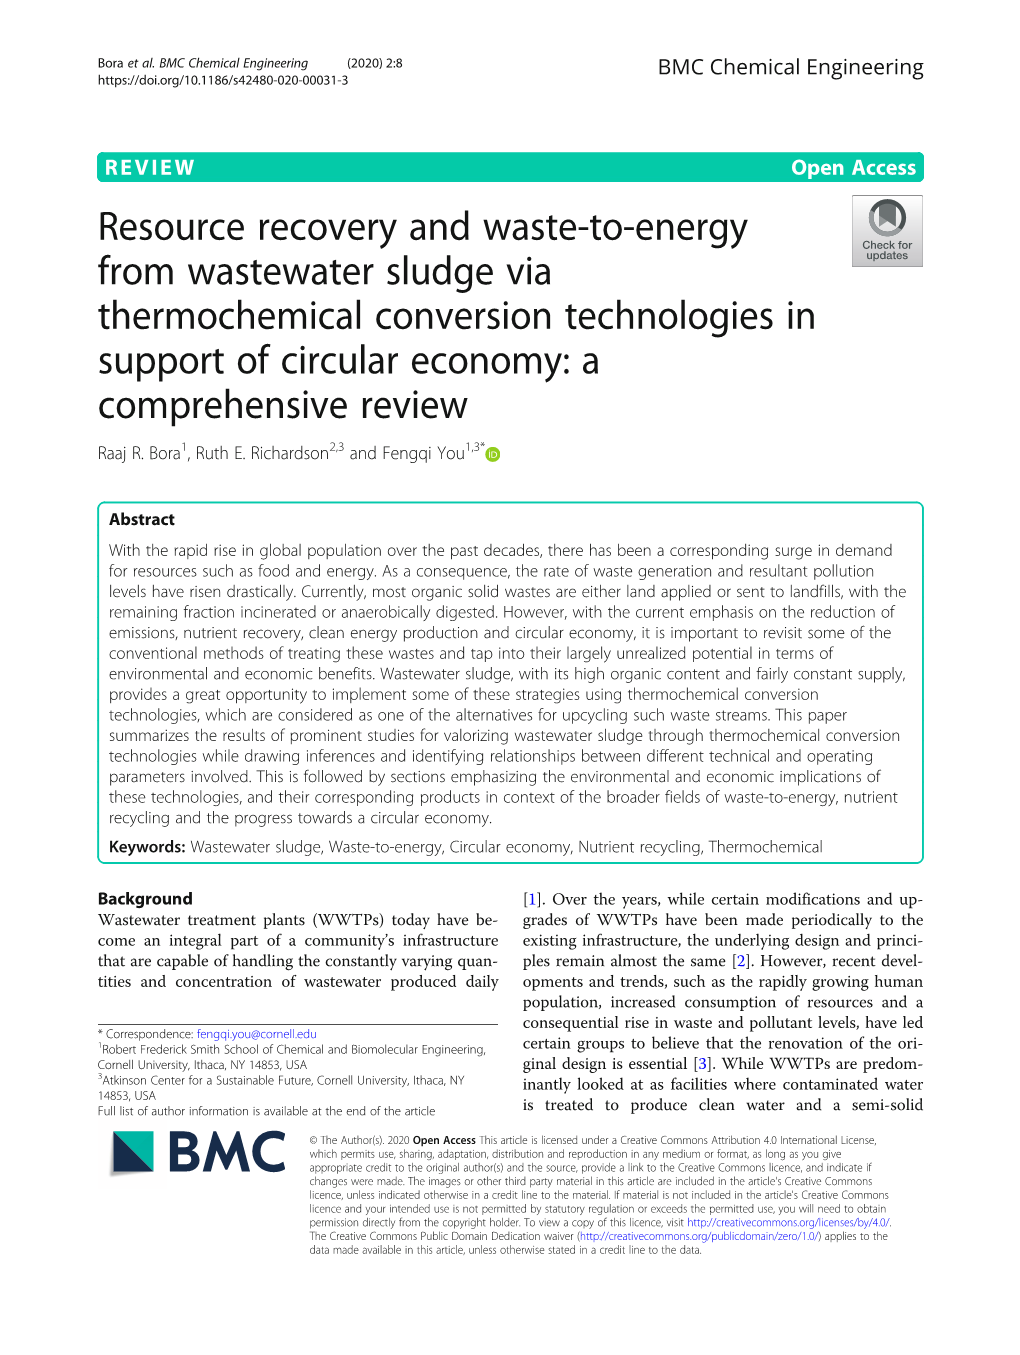 Resource Recovery and Waste-To-Energy from Wastewater Sludge Via Thermochemical Conversion Technologies in Support of Circular Economy: a Comprehensive Review Raaj R